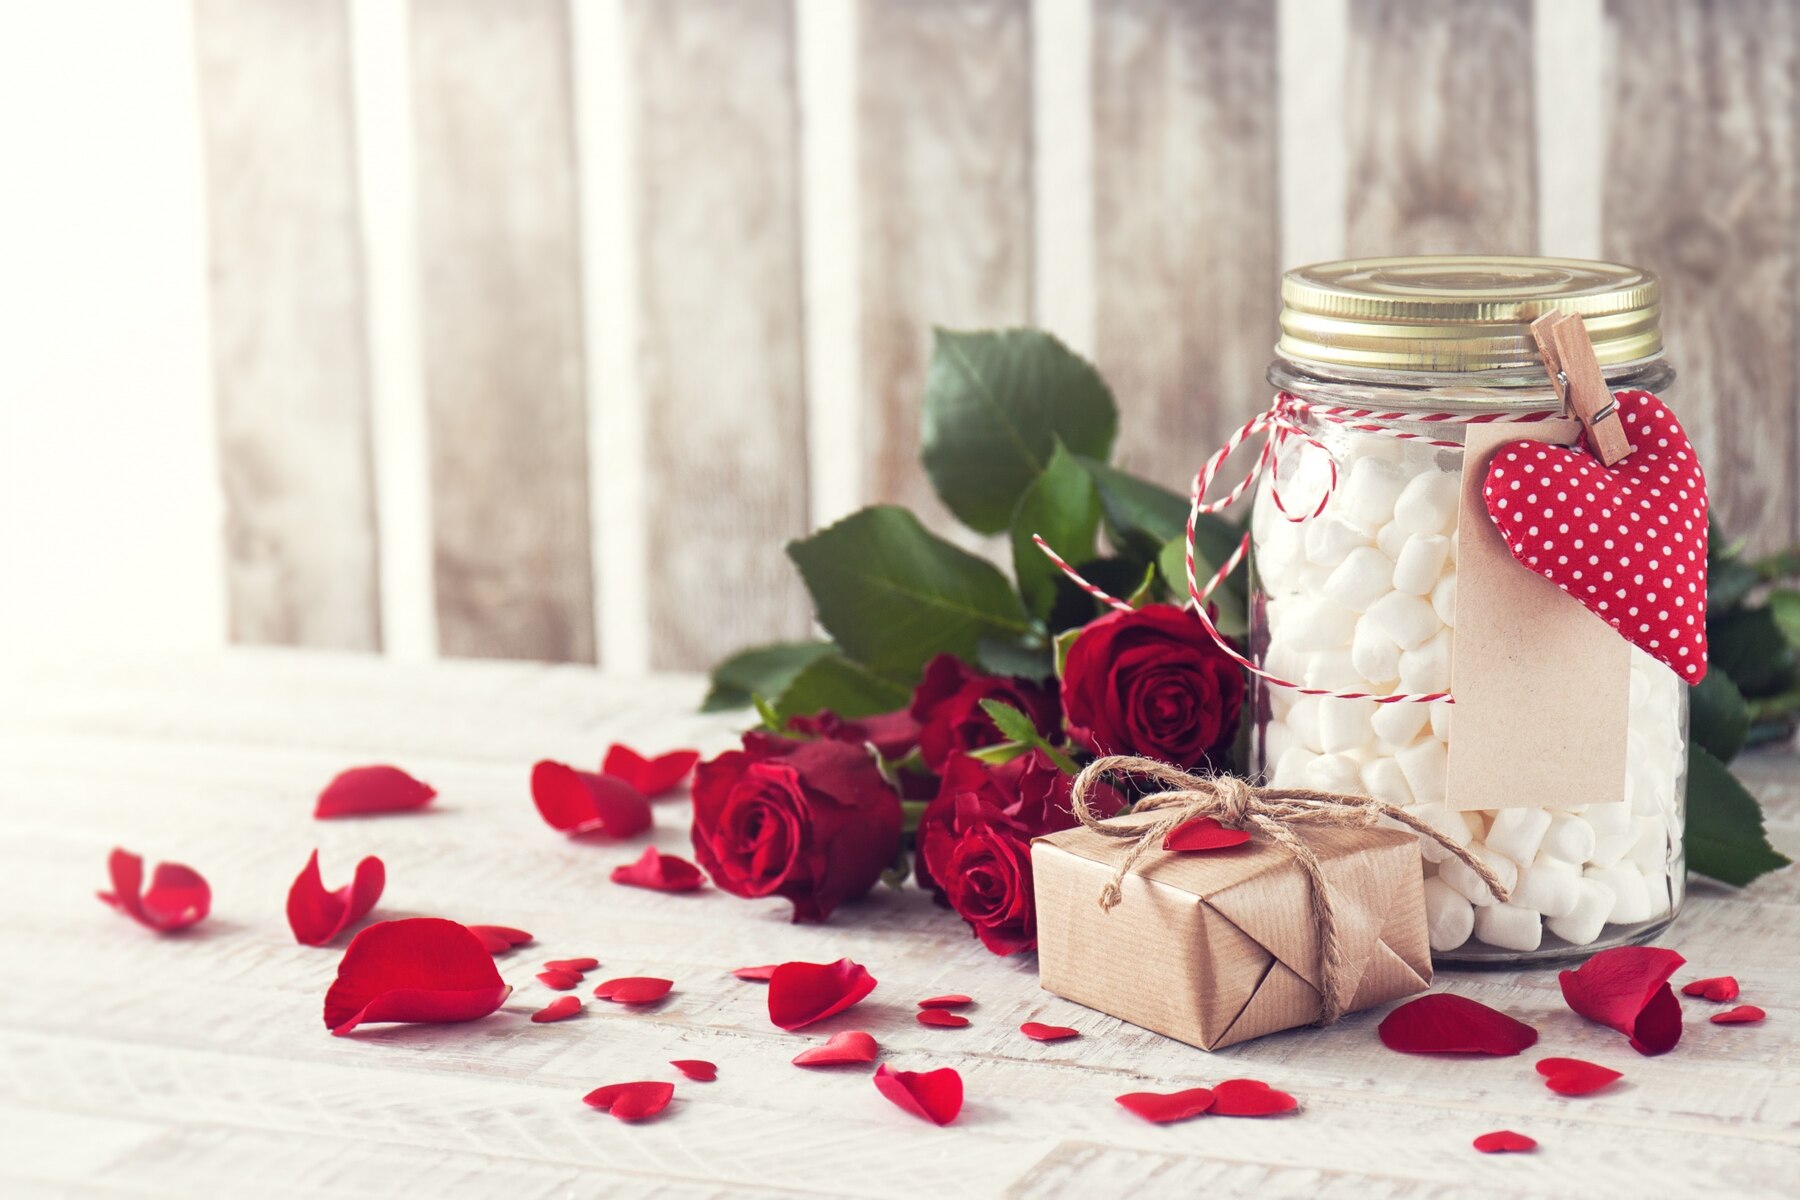 Homemade Gift Ideas For Husband Valentine's Day